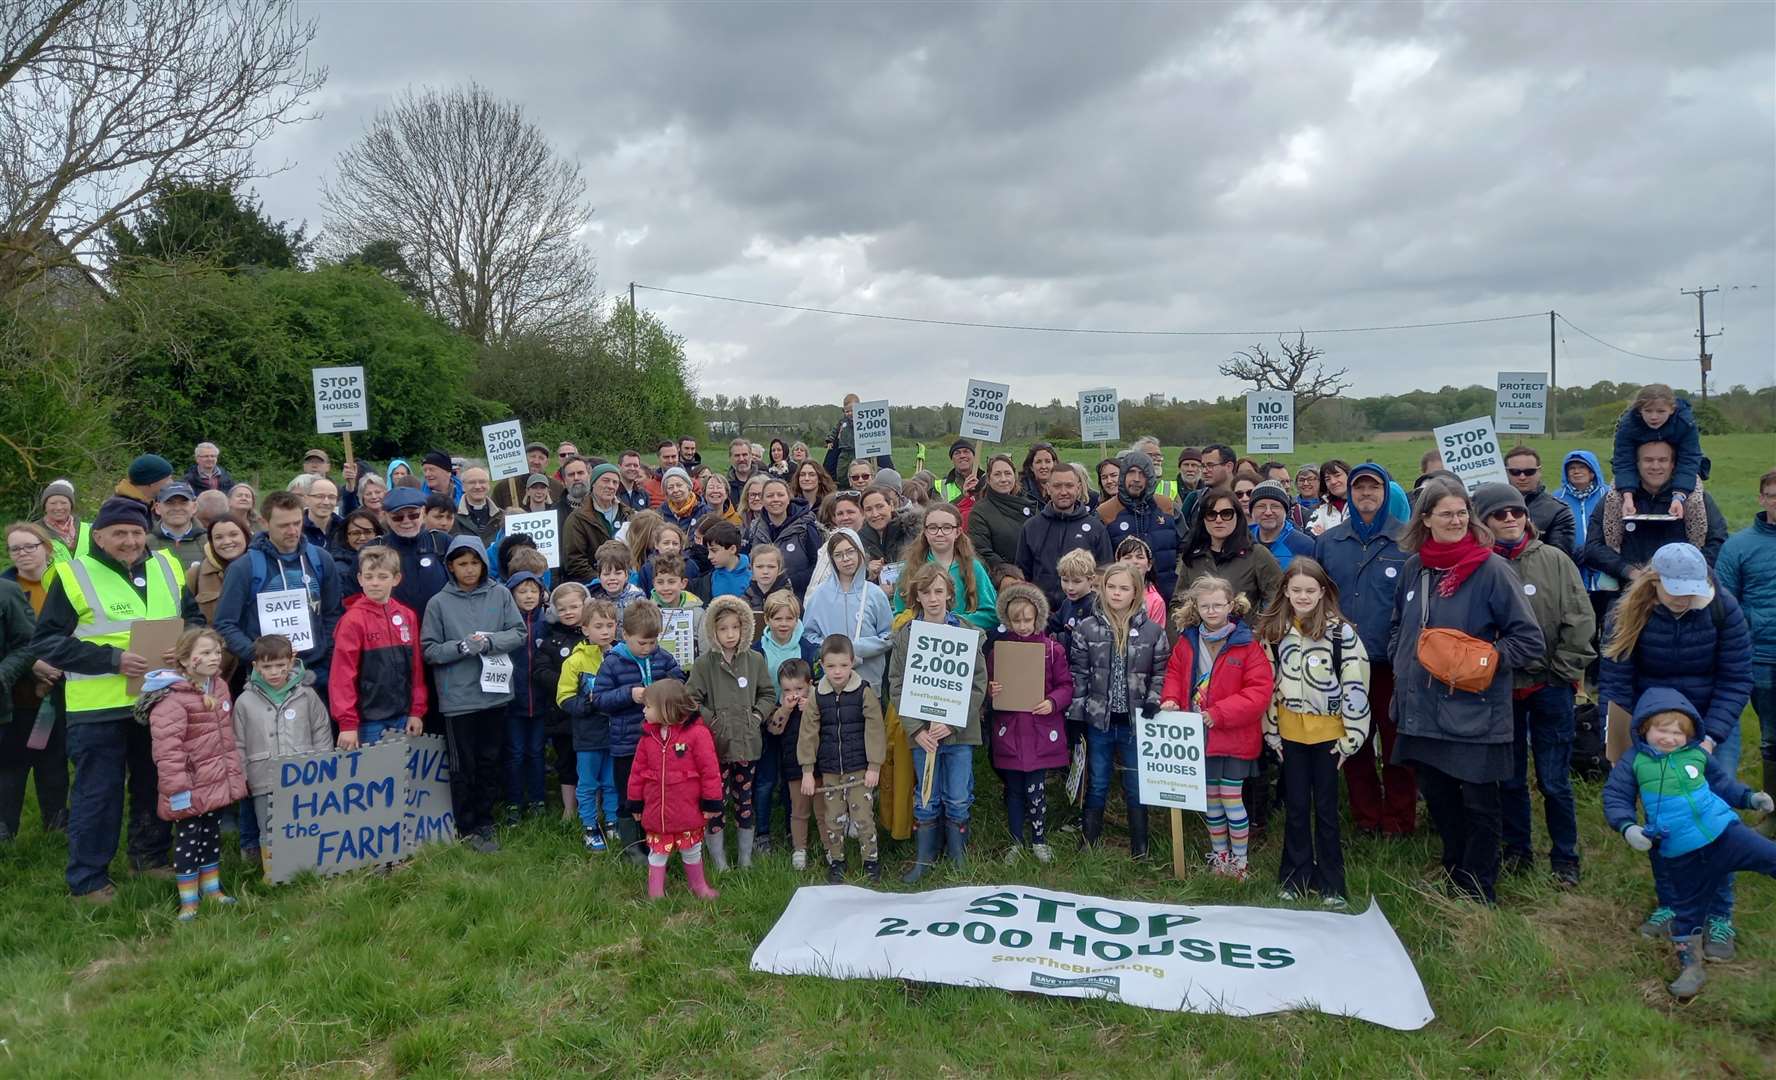 A previous Save the Blean protest attracted large numbers